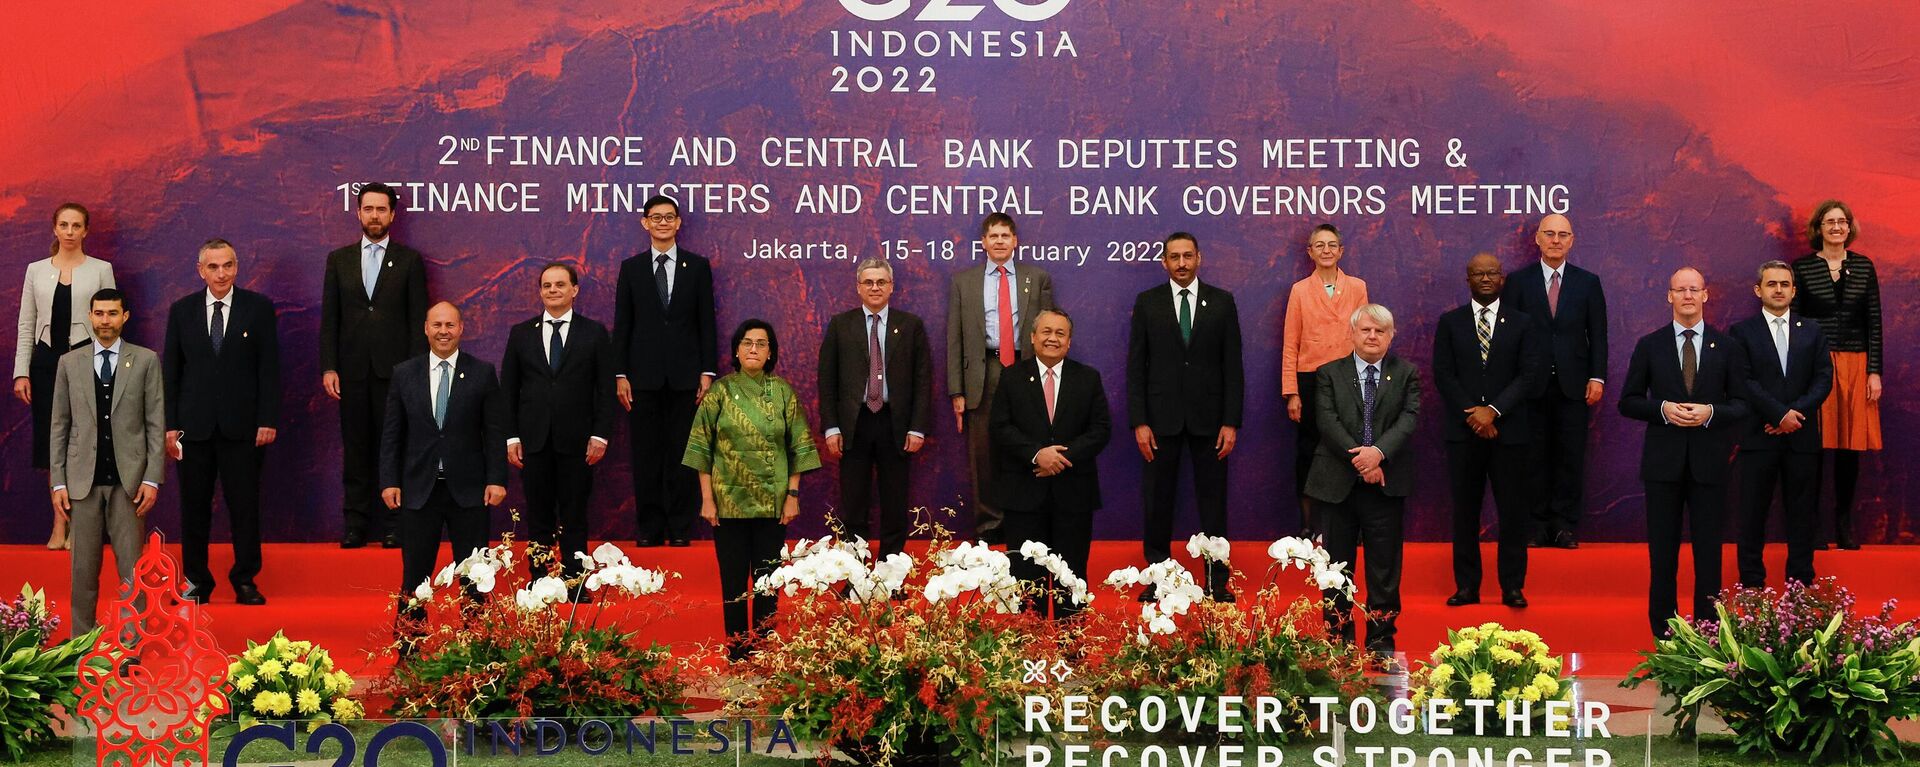 United Arab Emirates' Finance Minister Mohamed Al Hussaini, front row from left, Australia's Treasurer Josh Frydenberg, Indonesian Finance Minister Sri Mulyani, Indonesia's Central Bank Governor Perry Warjiyo, Italy's Central Bank Senior Deputy Governor Luigi Federico Signorini, Chairman of Financial Stability Board (FSB) Klaas Knot and other delegates pose for a photo during the G20 Finance Ministers and Central Bank Governors Meeting in Jakarta, Indonesia, Thursday, Feb. 17, 2022.  - Sputnik International, 1920, 20.04.2022